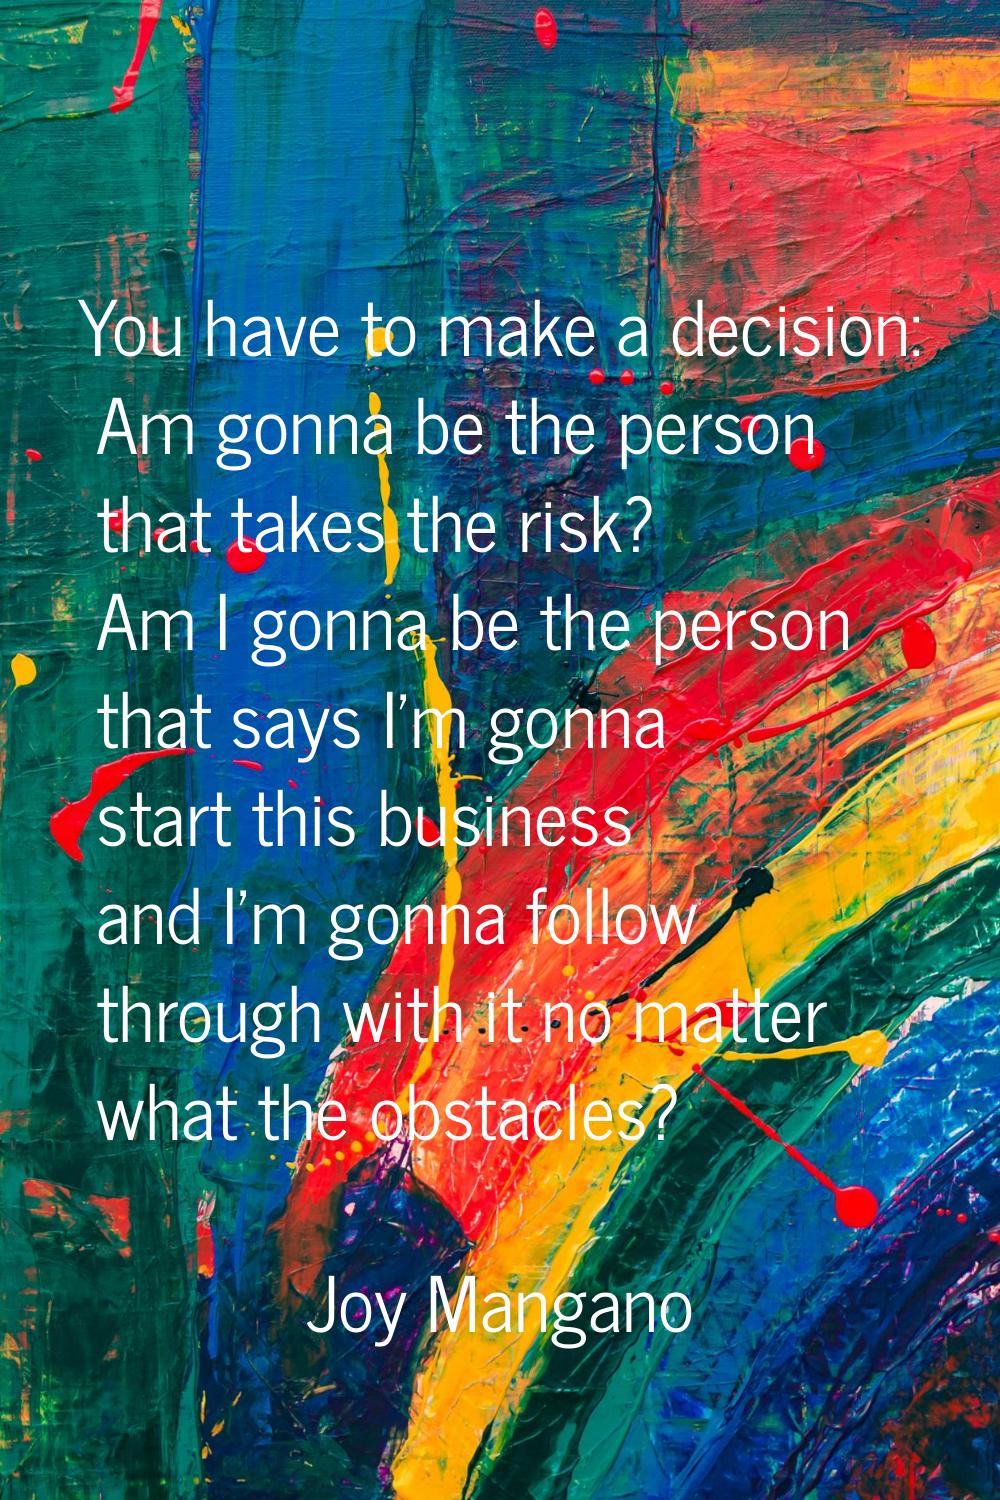 You have to make a decision: Am gonna be the person that takes the risk? Am I gonna be the person t